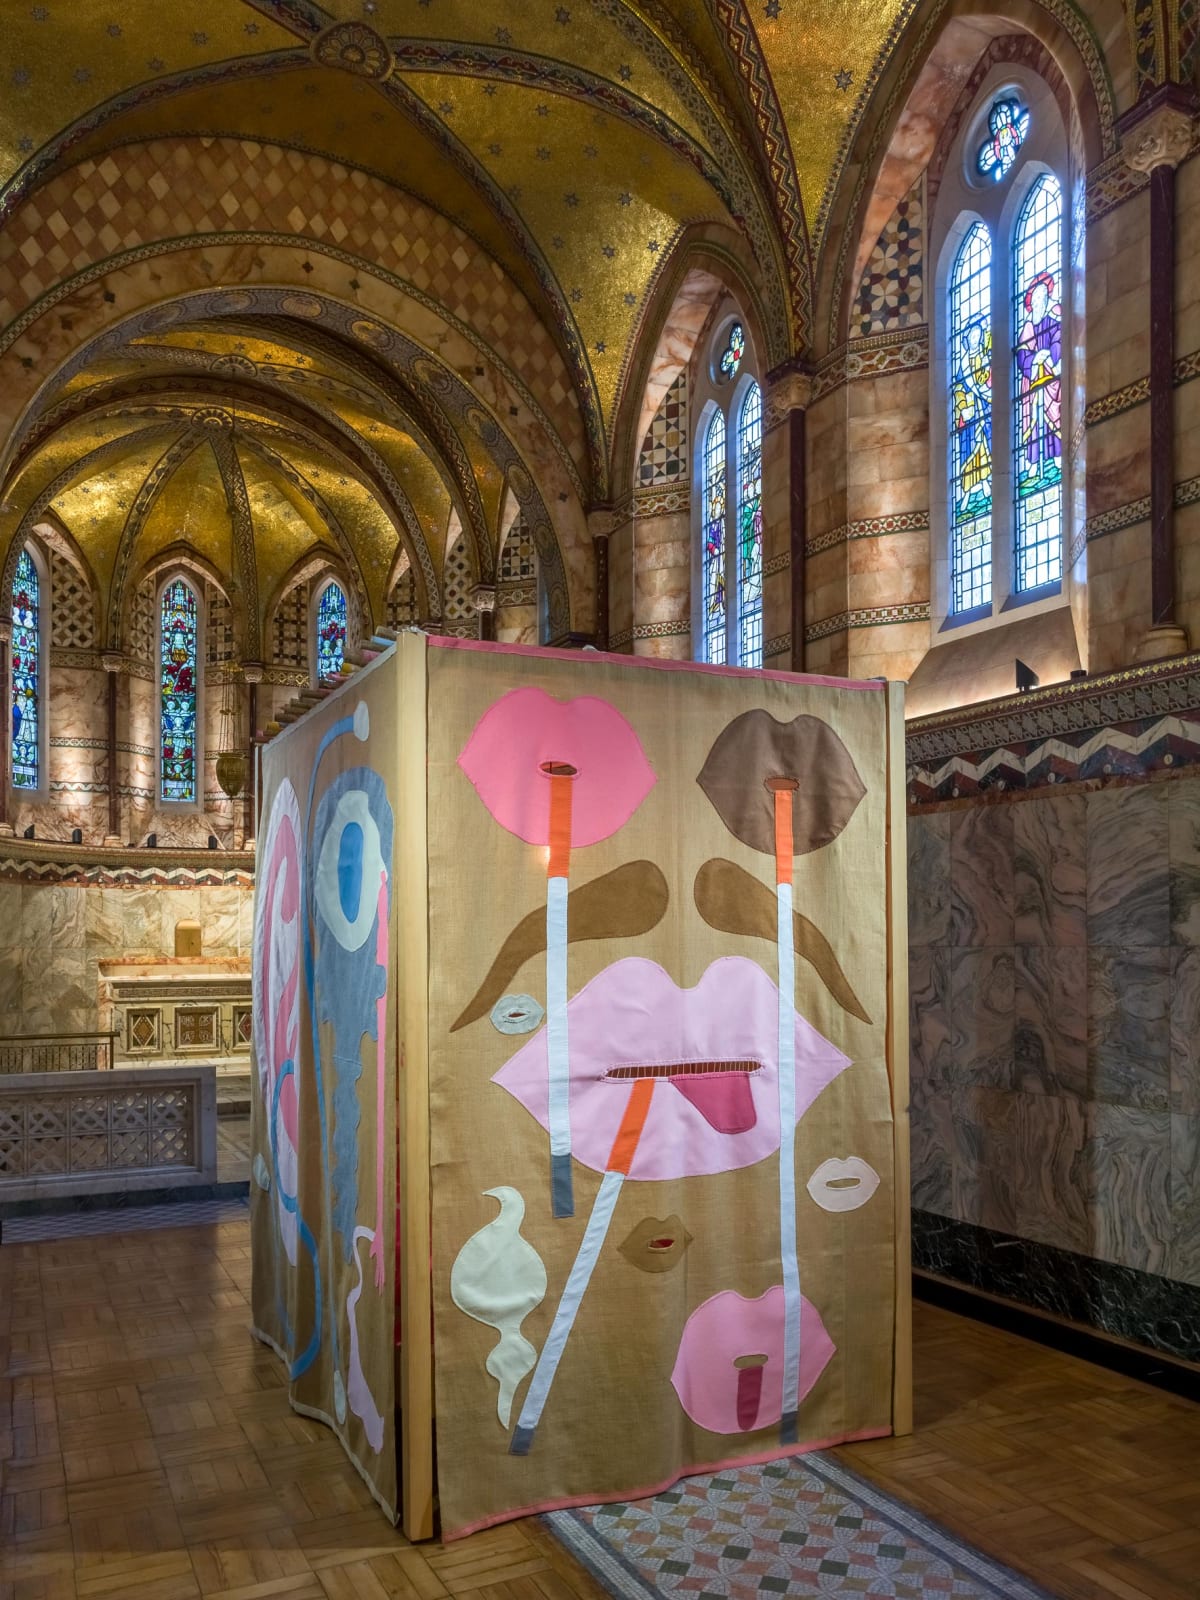 <p>Installation view: 'My biggest fear is that someone will crawl into it', Fitzrovia Chapel, London (2019). <span>Photo by Mark Blower.</span></p>